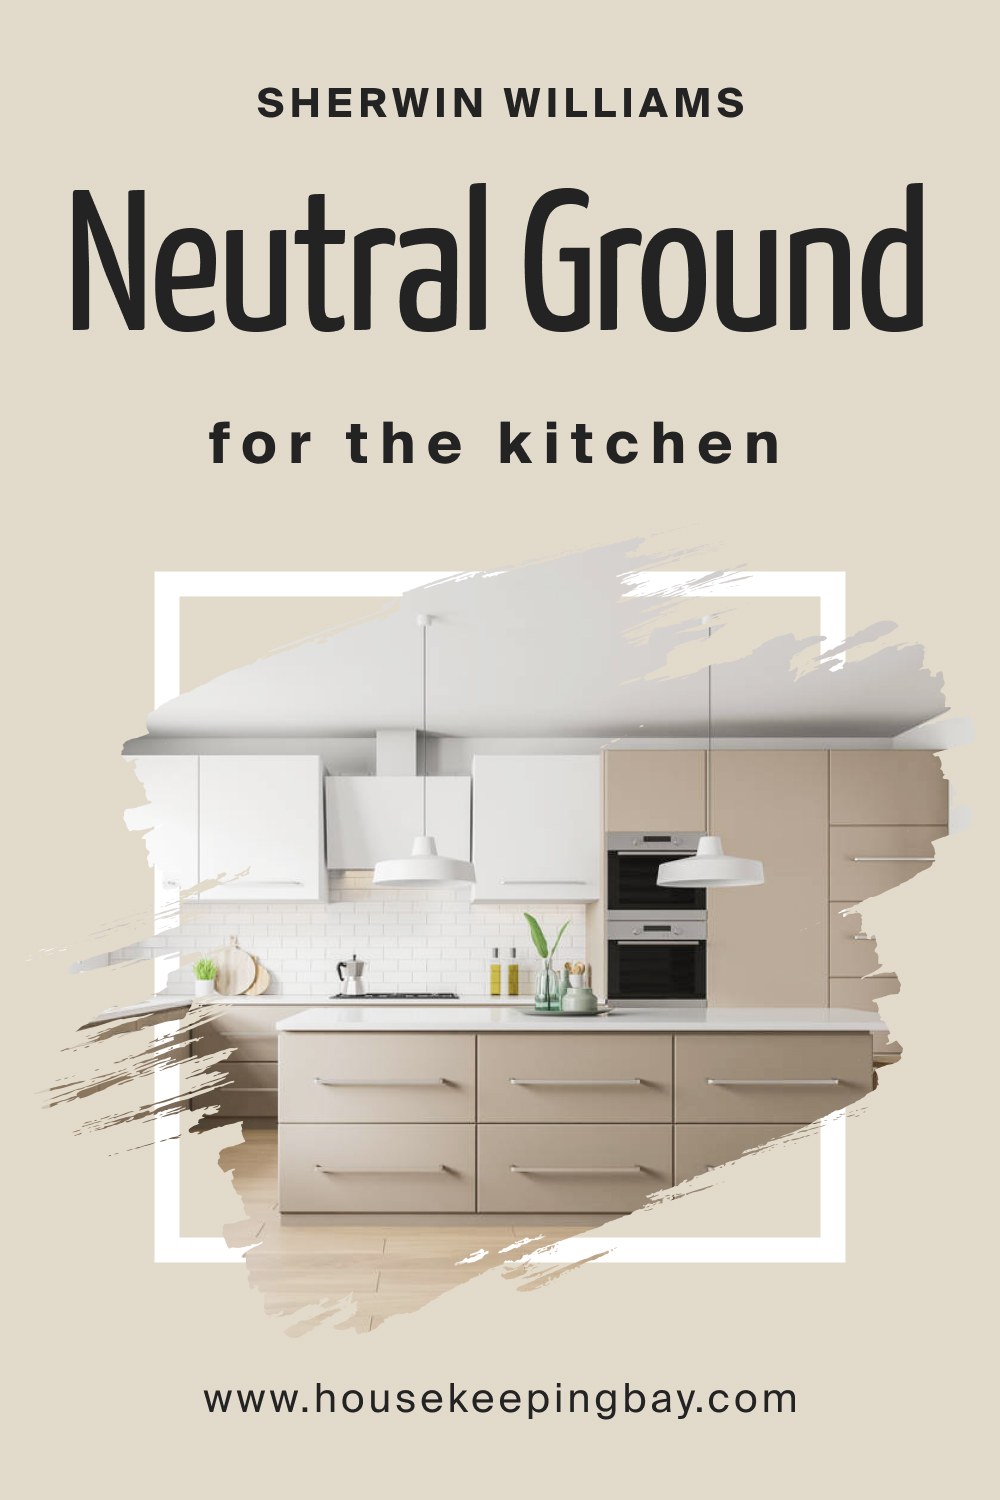 Sherwin Williams. Neutral Ground For the Kitchen